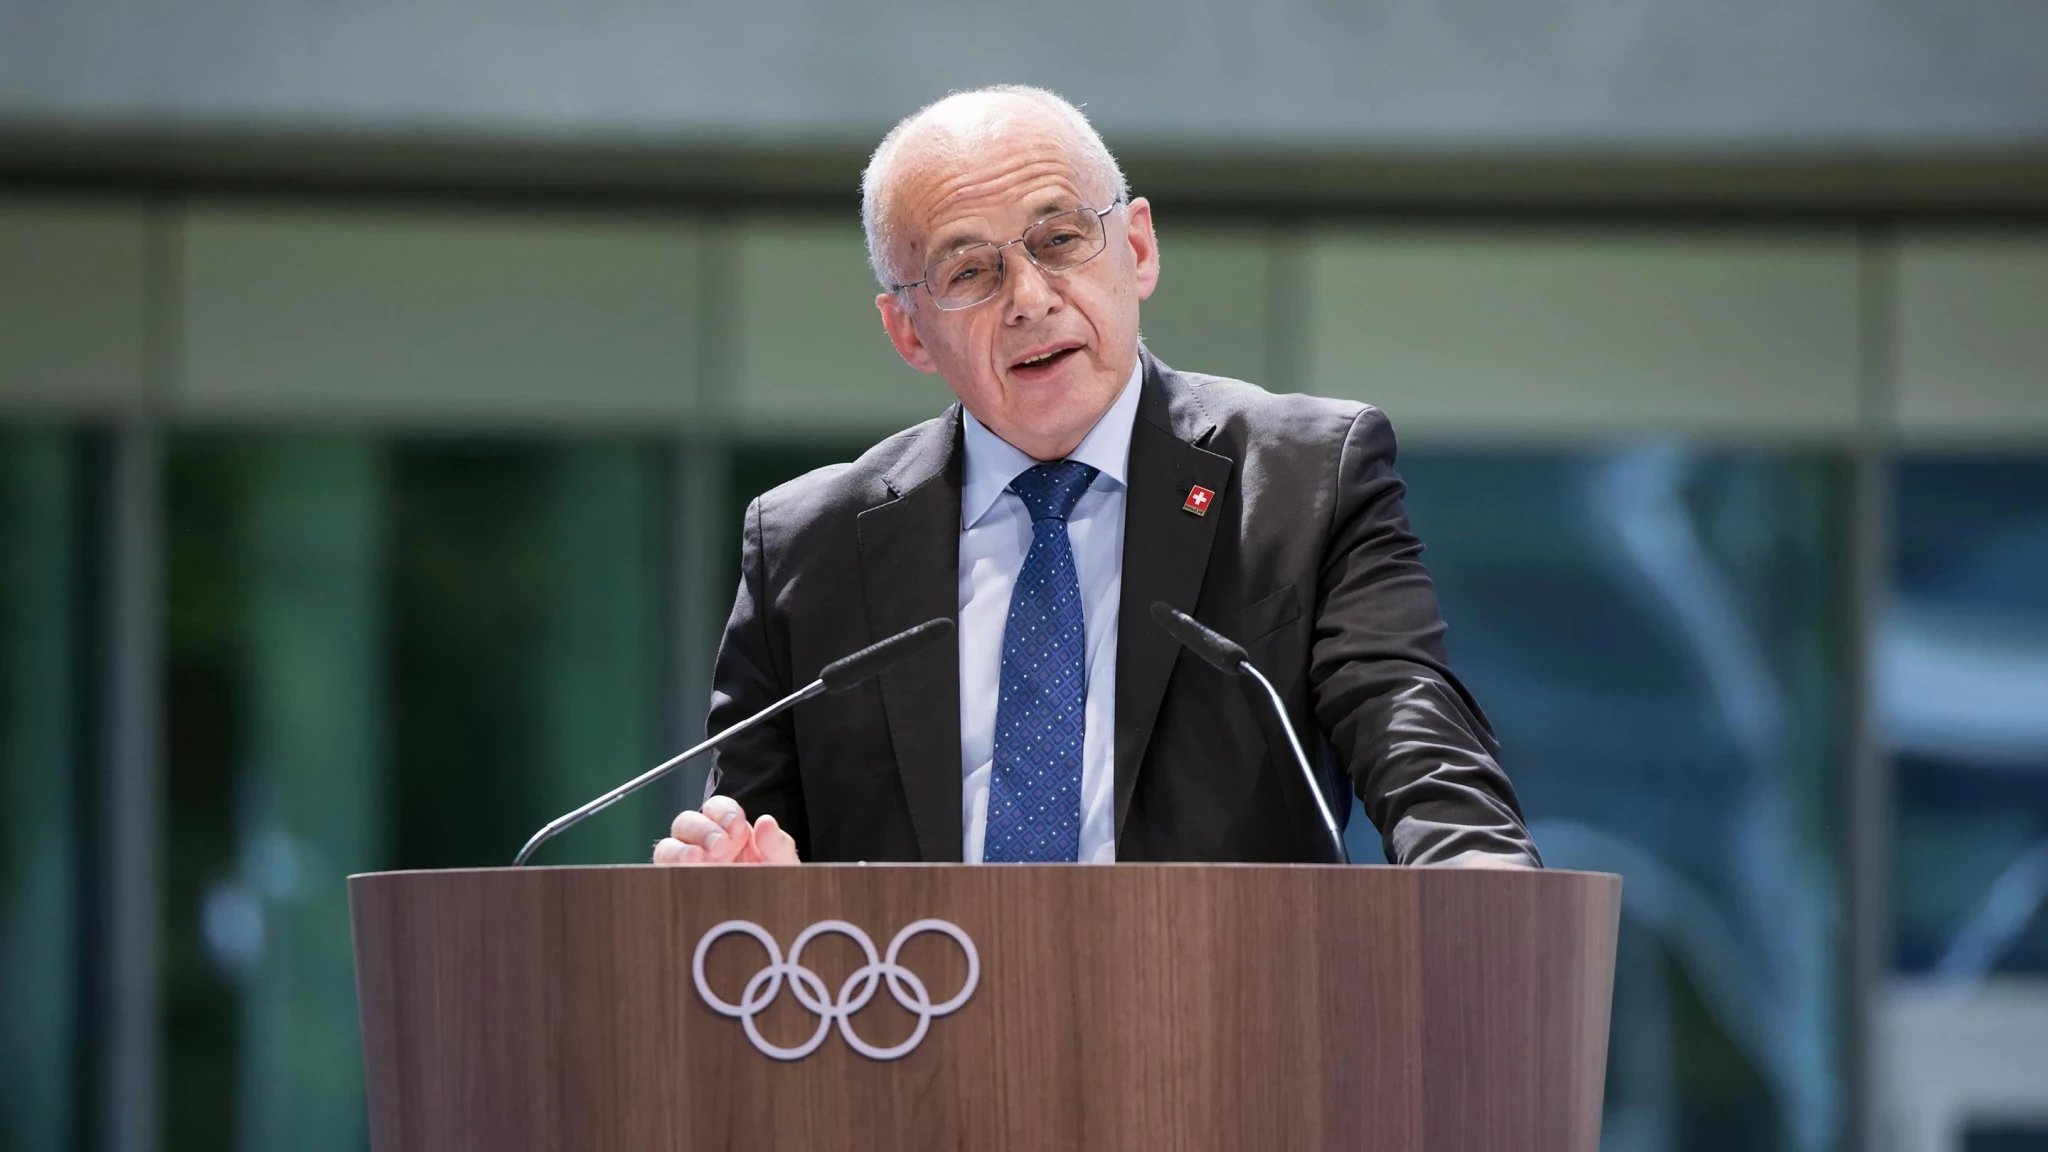 Former Swiss President Ueli Maurer has been proposed for election to the IOC Ethics Commission ©IOC